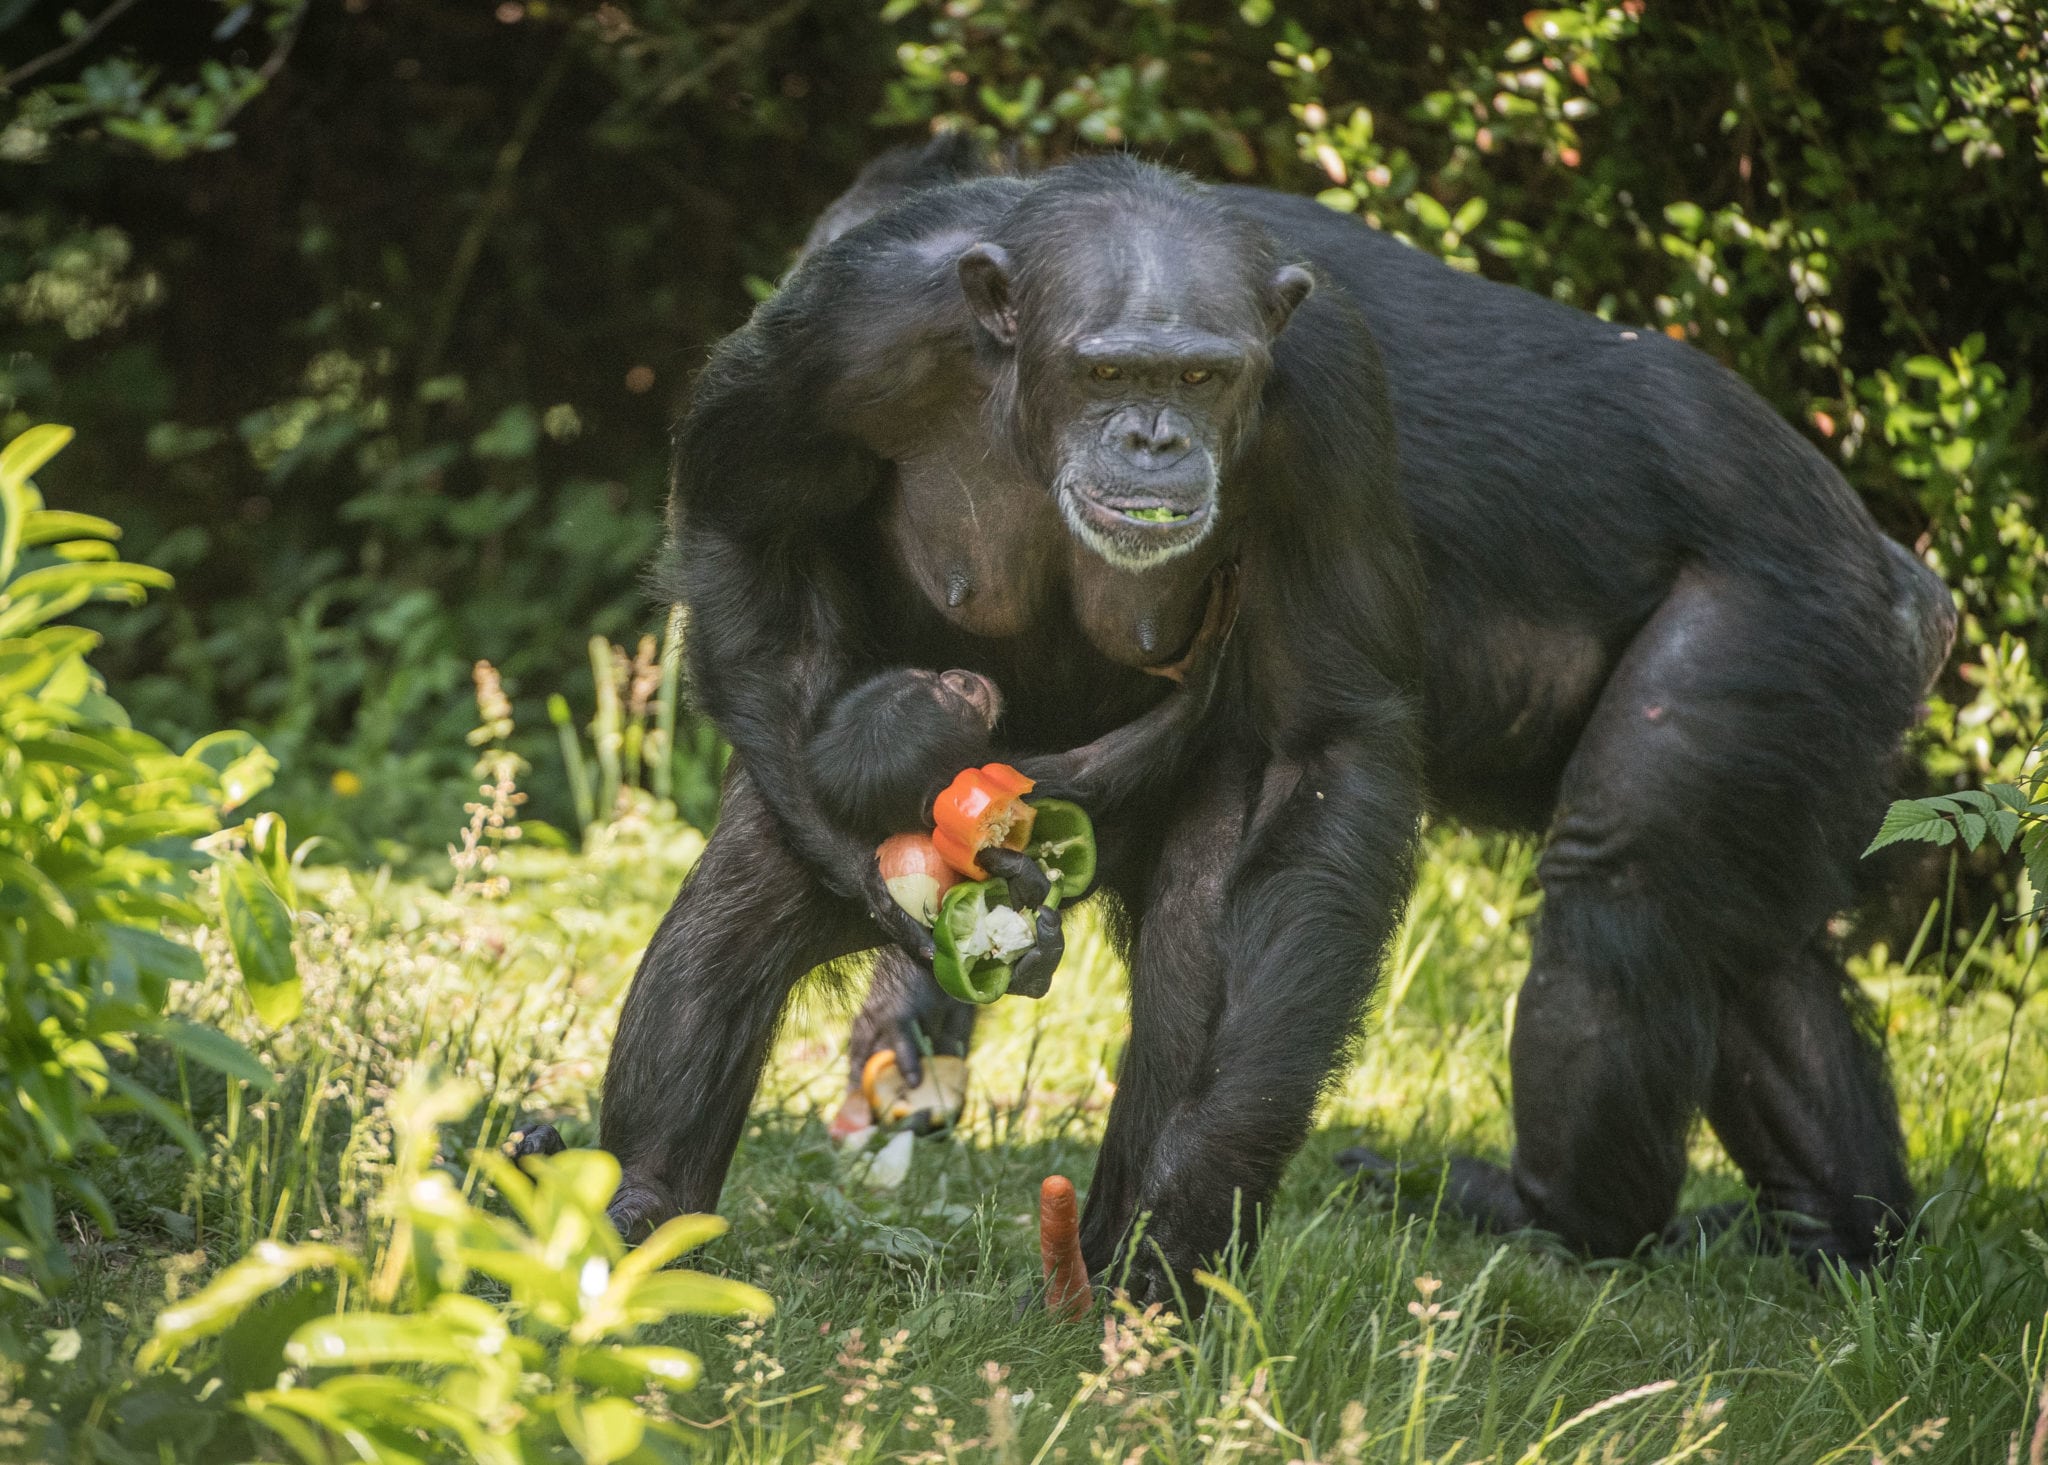 First chimpanzee to be born in nearly a decade at Chester Zoo